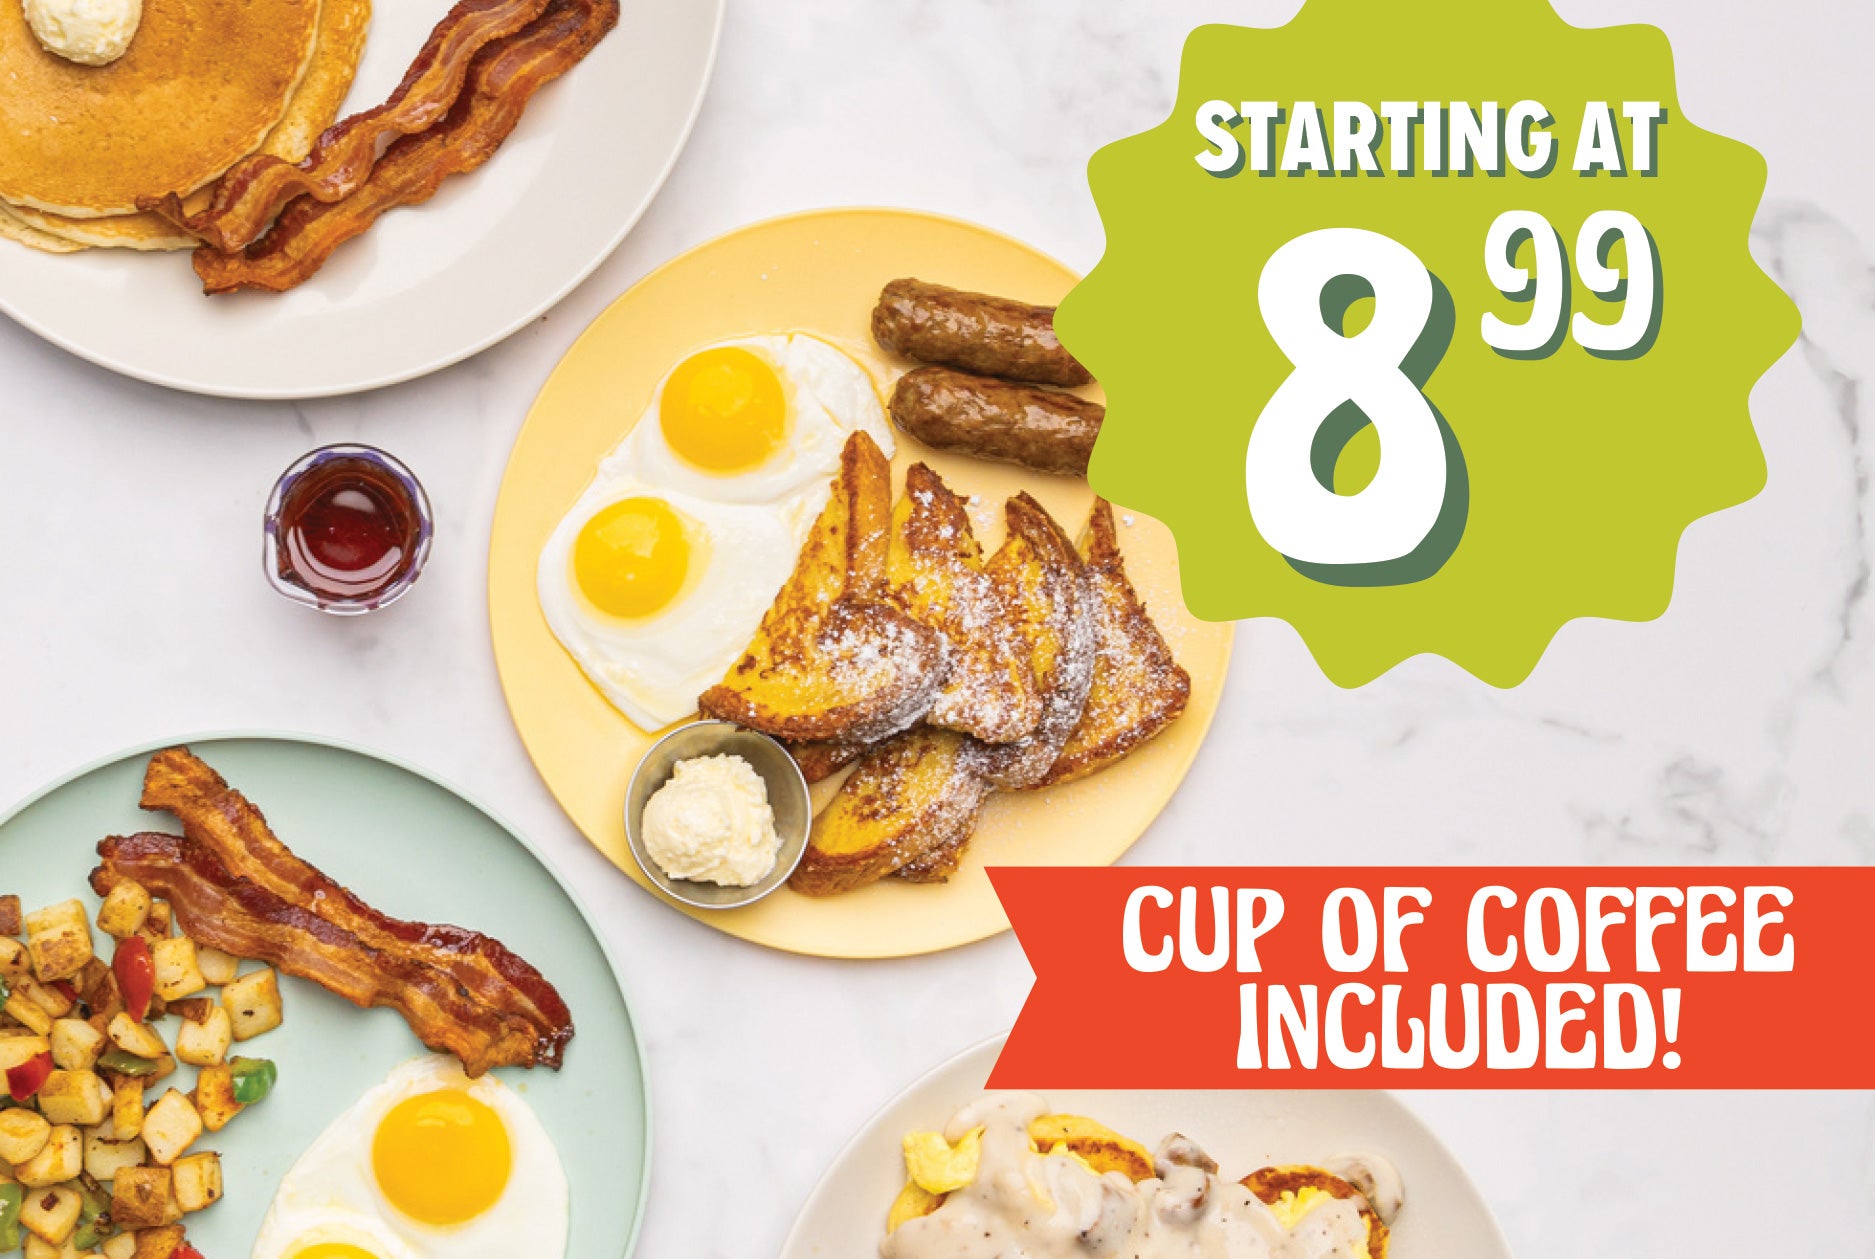 Starting at 8.99, cup of coffee included!